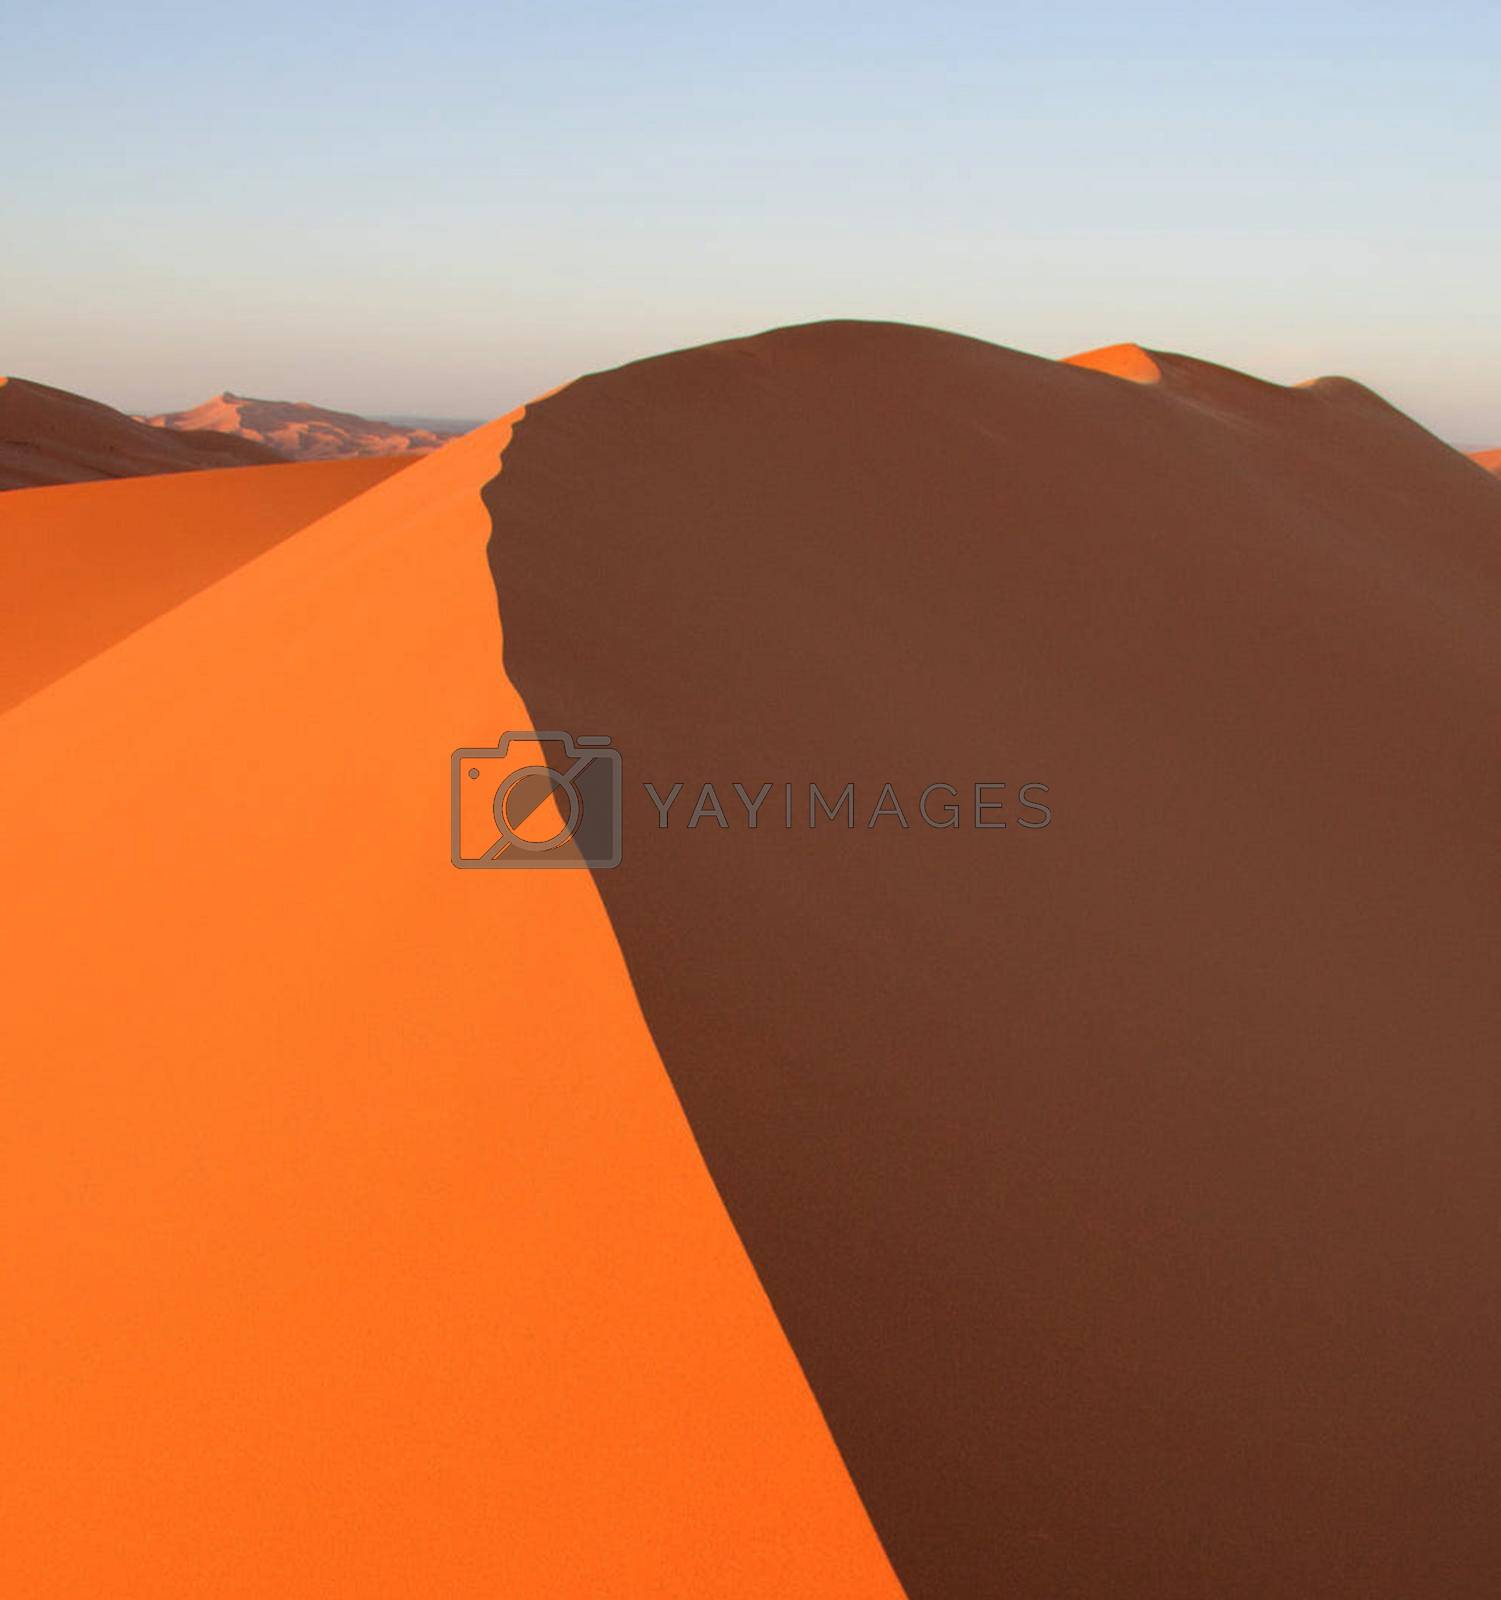 Royalty free image of Picturesque Sahara Desert,Morocco landscape by TravelSync27